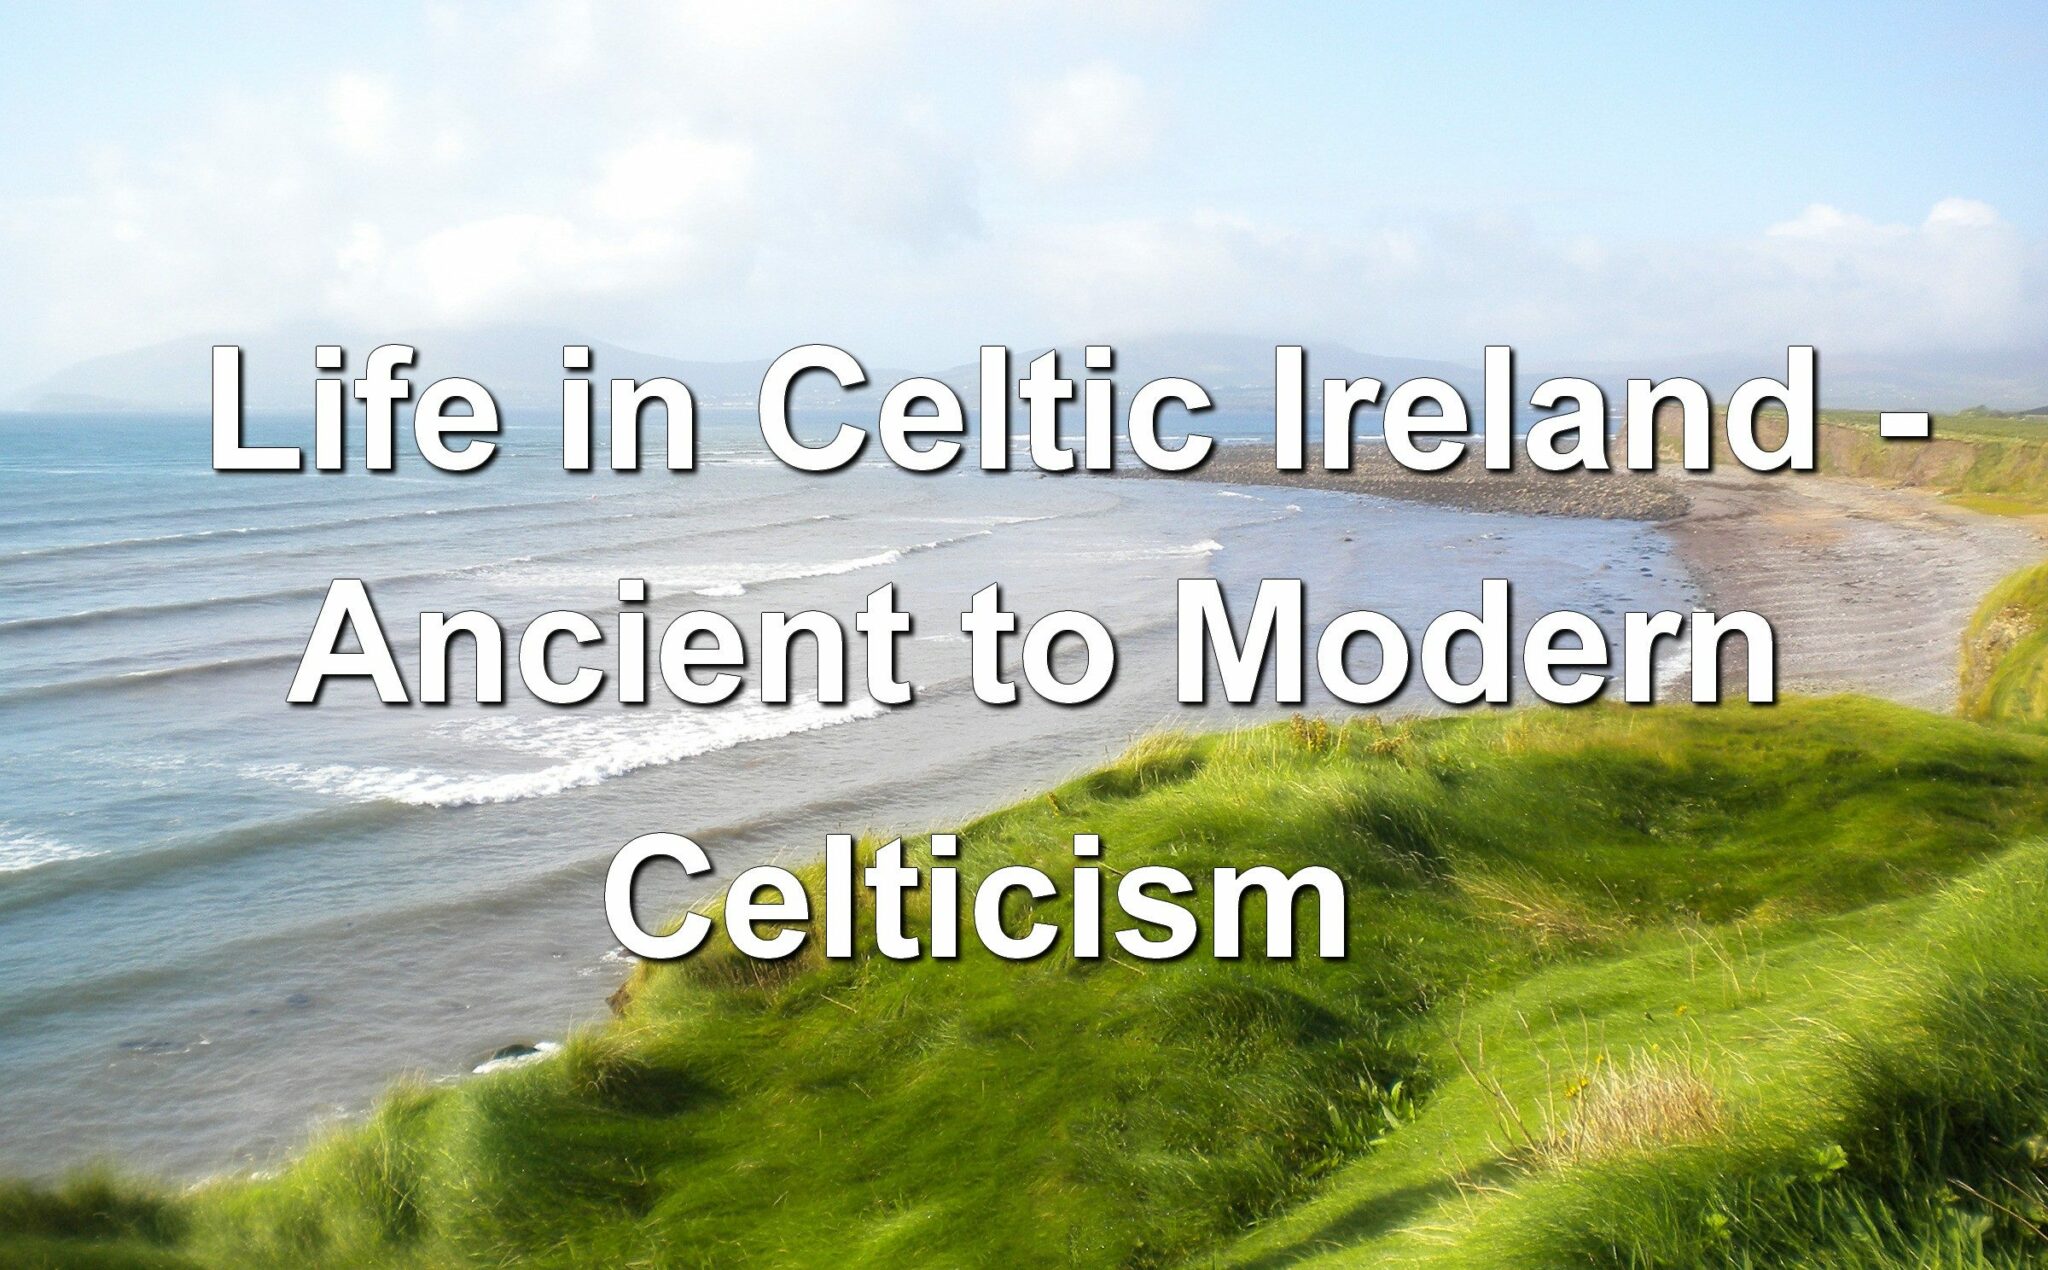 Life in Celtic Ireland - Ancient To Modern Celticism